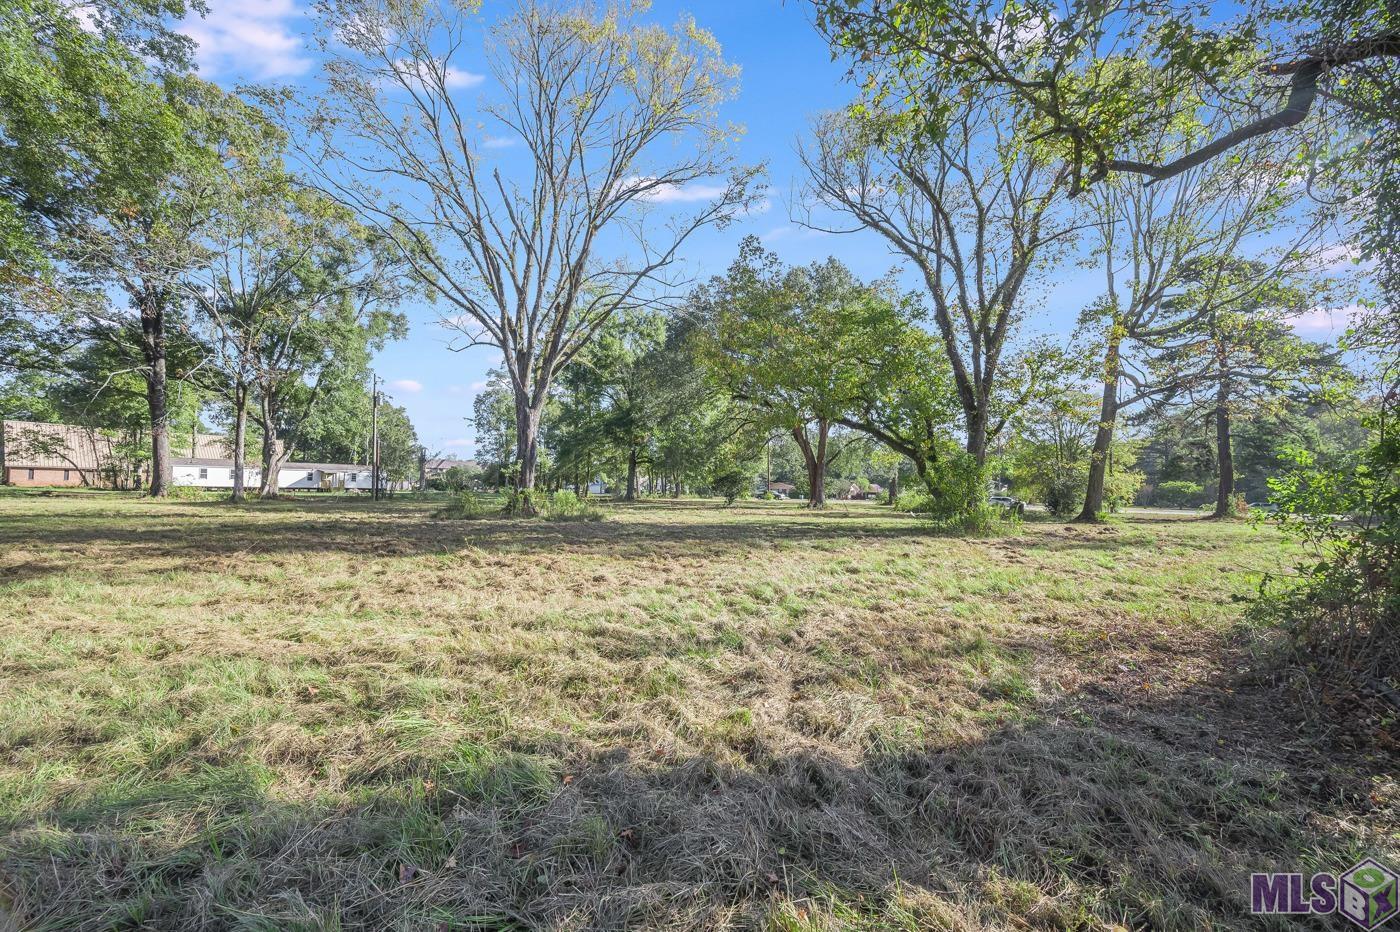 This 6.76-acres lot has been cleared and zoned Commercial. With 286.74 road frontage and beautiful oak trees, it is the perfect location for your next business adventure.